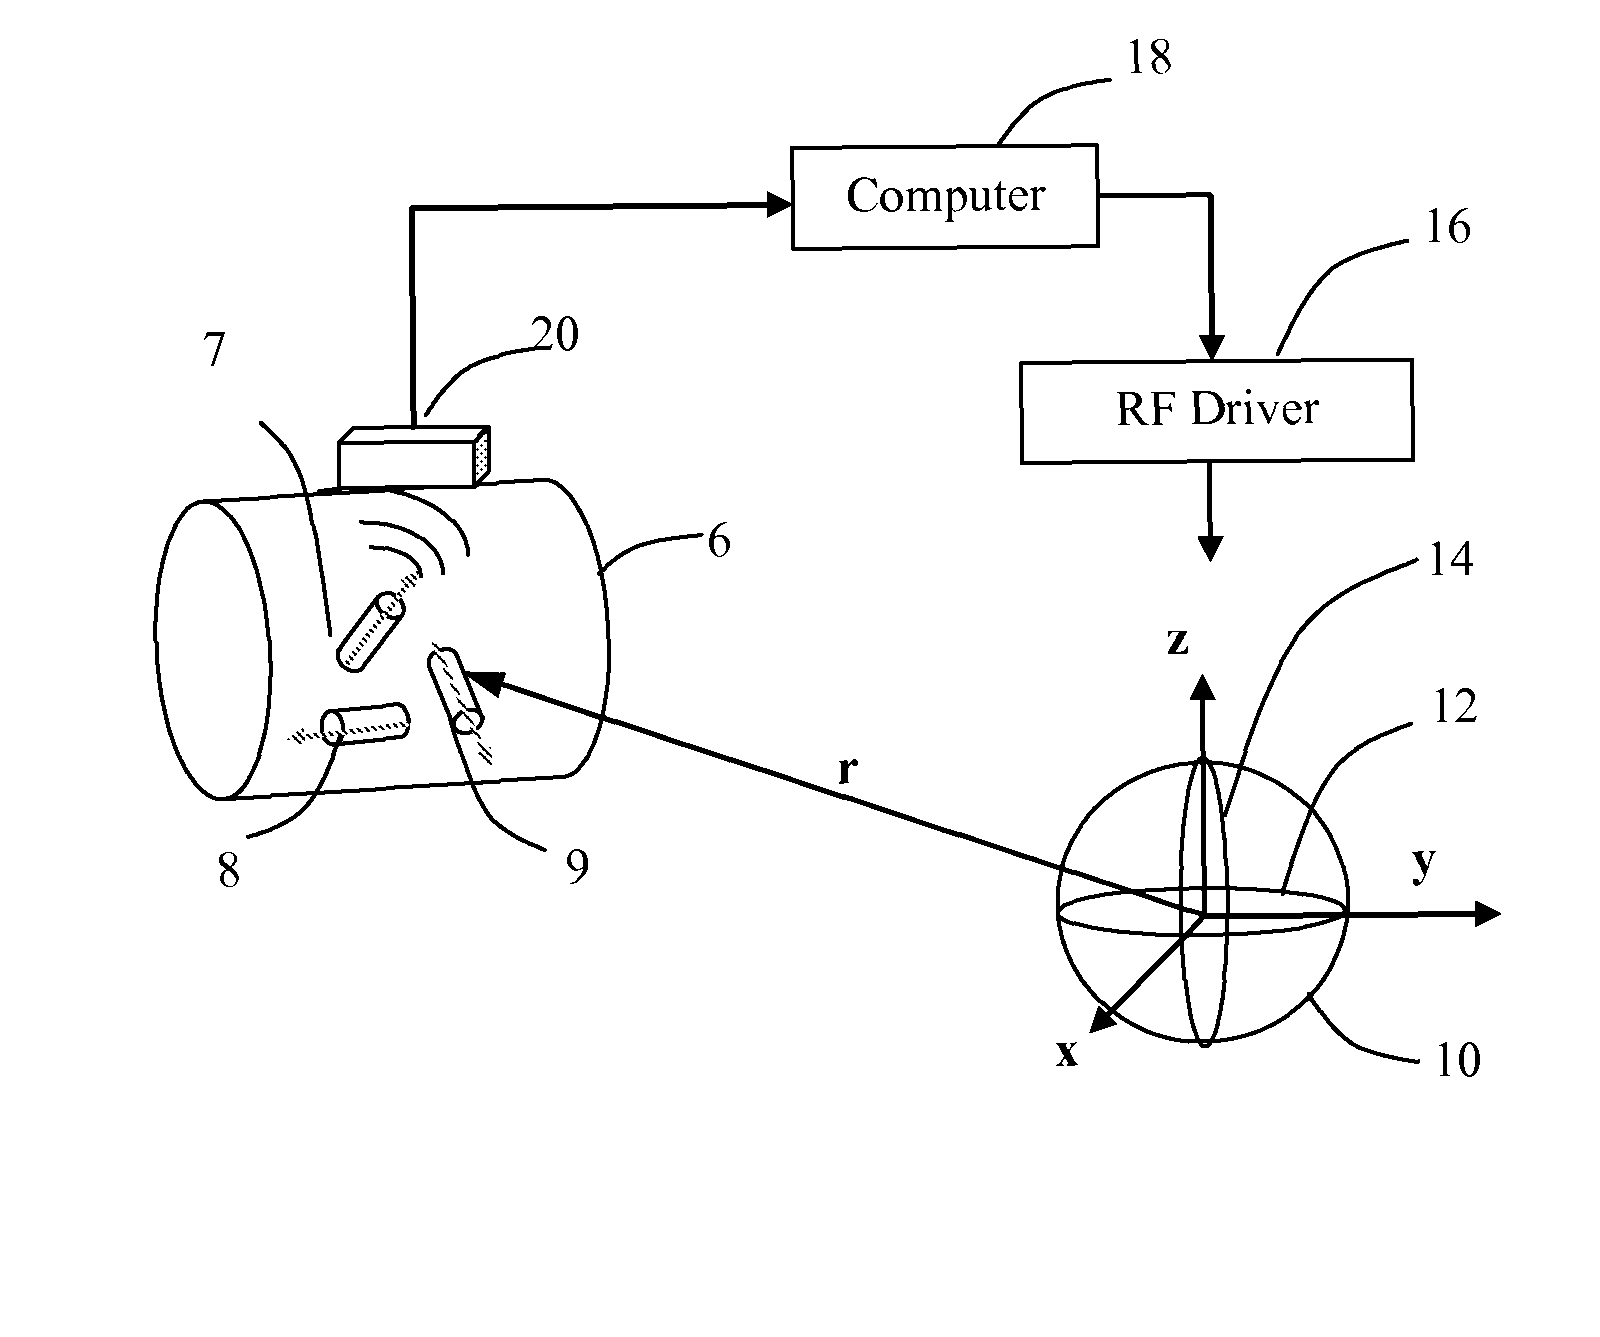 Method and apparatus for detecting object orientation and position